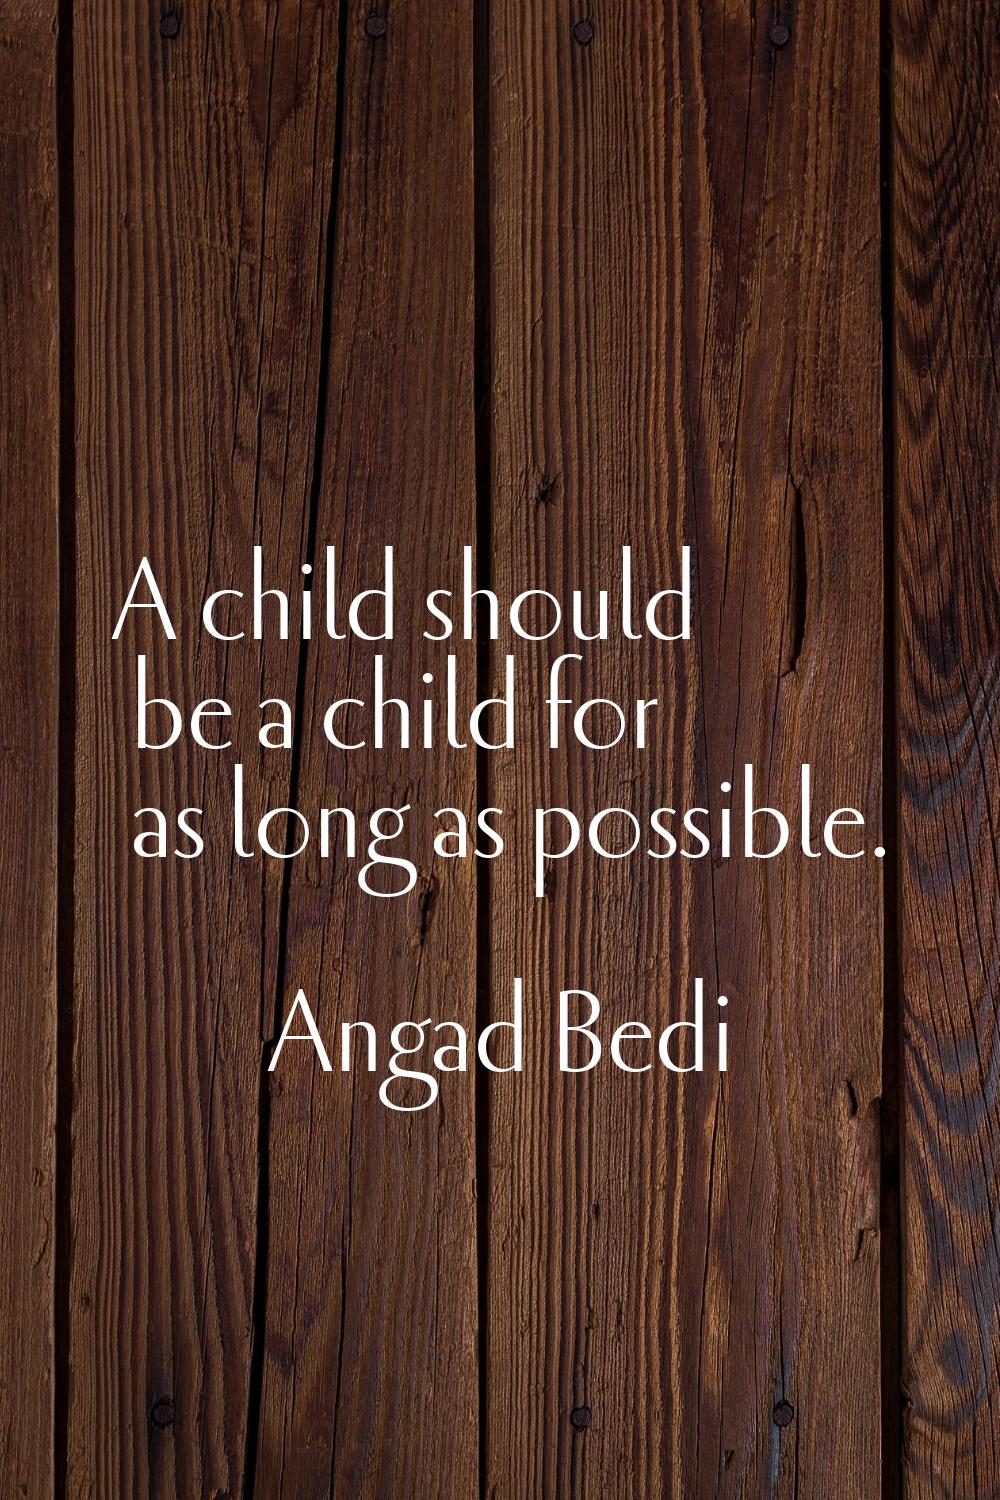 A child should be a child for as long as possible.